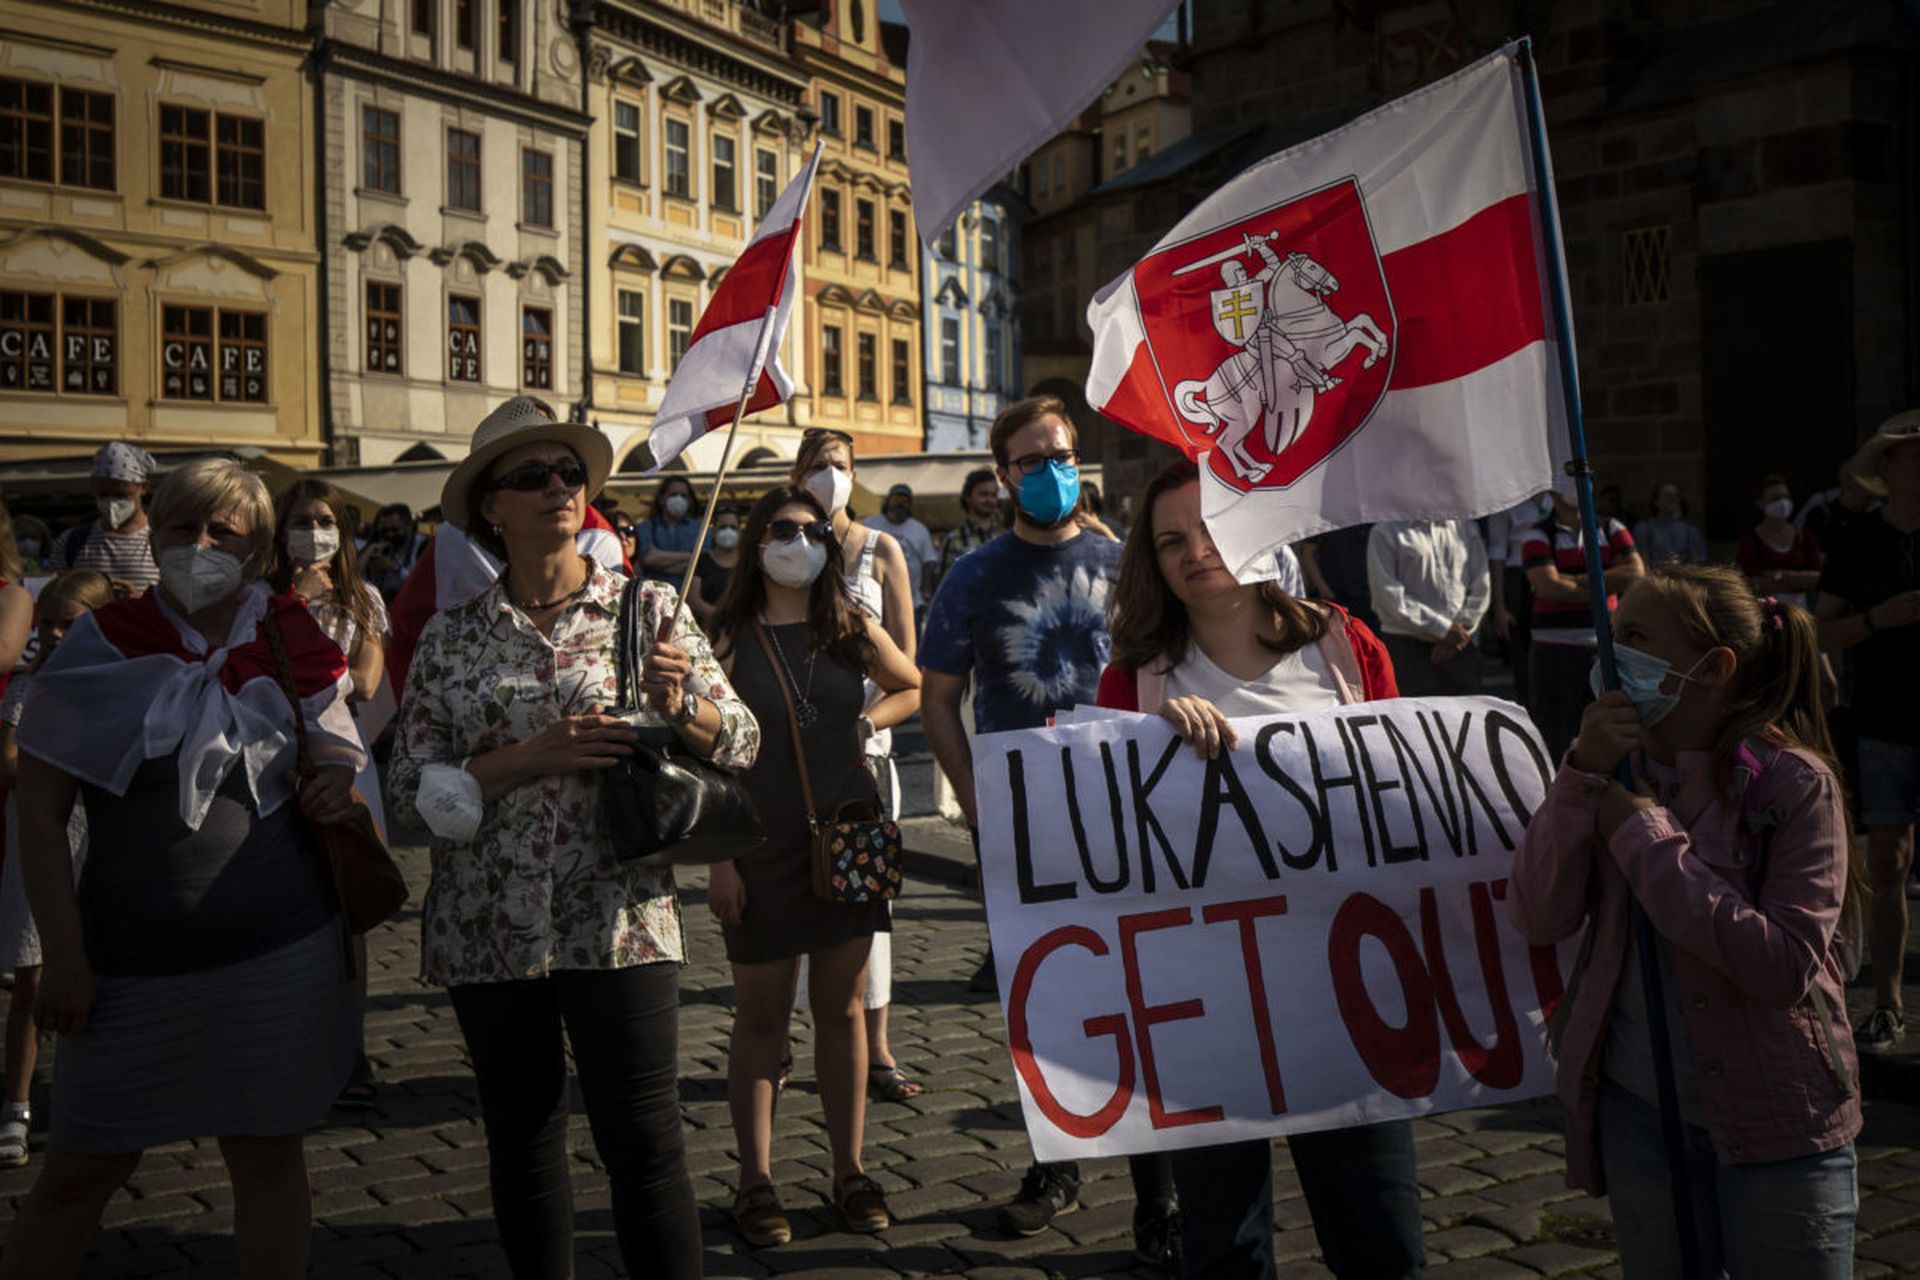 Supporters of the Belarusian opposition leader Sviatlana Tsikhanouskaya attend a protest against regime of the Alexander Lukashenko on June 07, 2021 in Prague, Czech Republic. New research from Mandiant tracks the way Belarusian political opposition to Lukashenko were increasingly targeted by the Ghostwriter influence campaign. (Photo by Gabriel K...